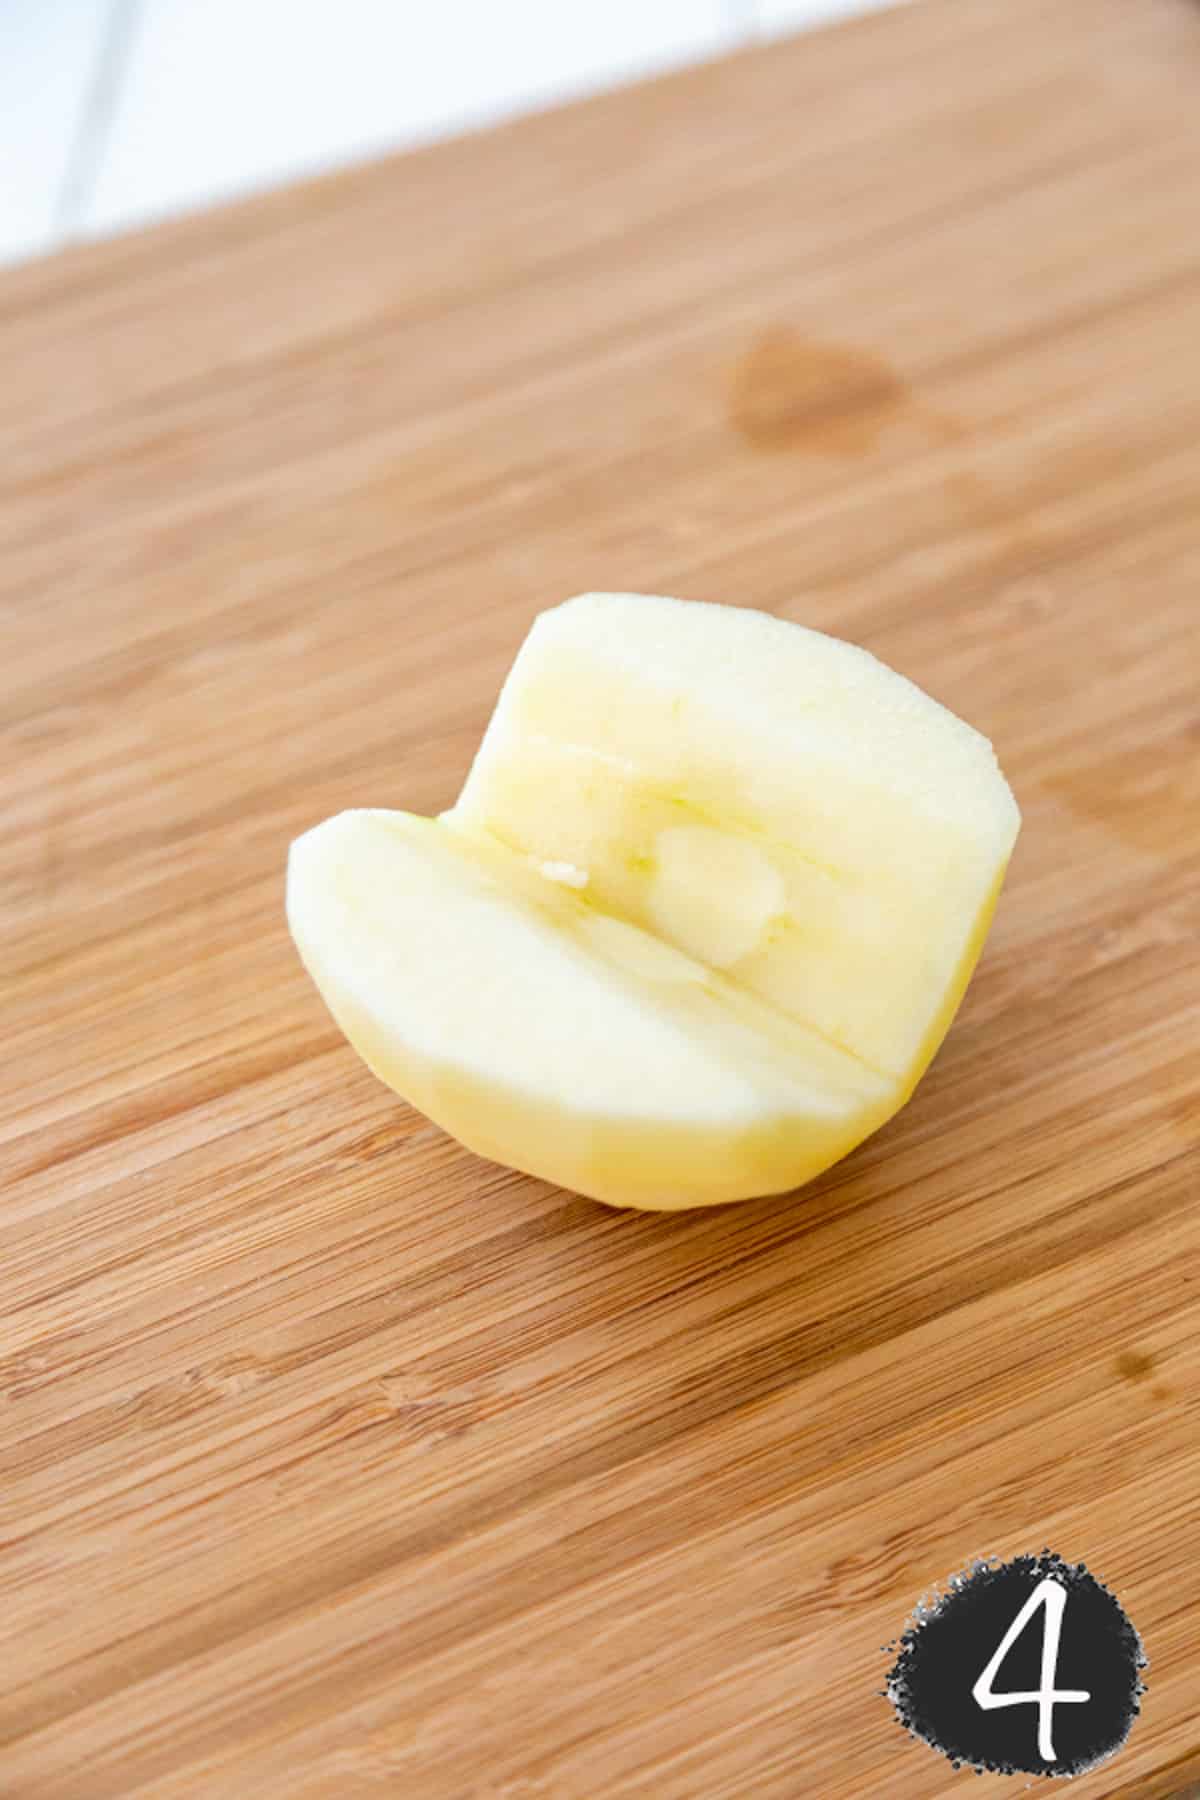 Half of a peeled and cored apple on a wooden board.